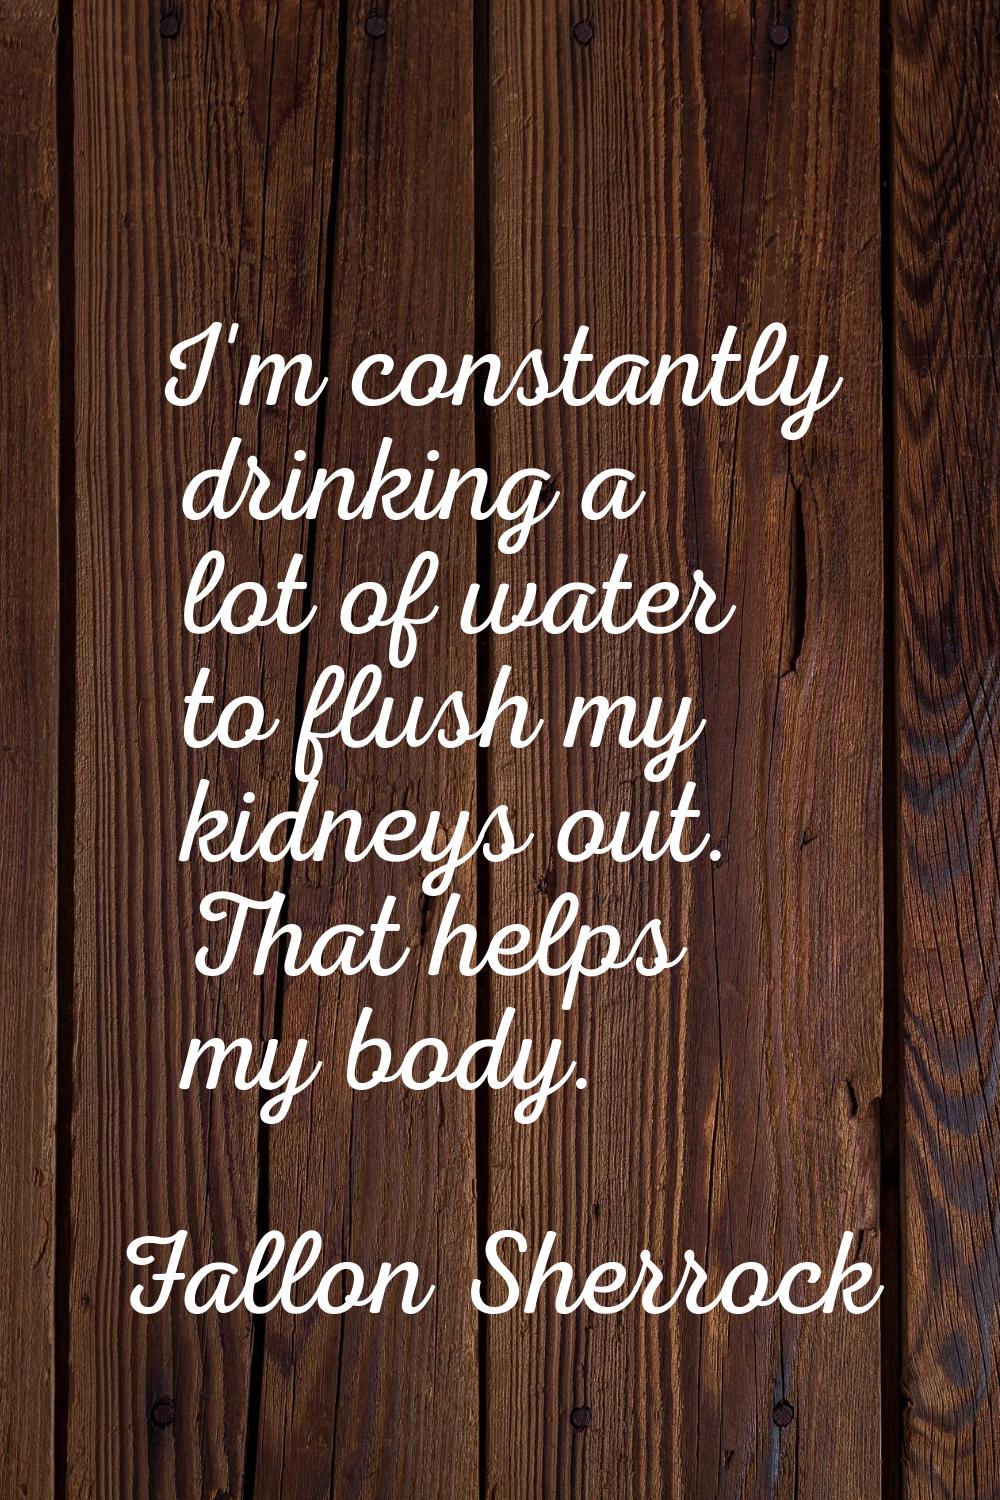 I'm constantly drinking a lot of water to flush my kidneys out. That helps my body.